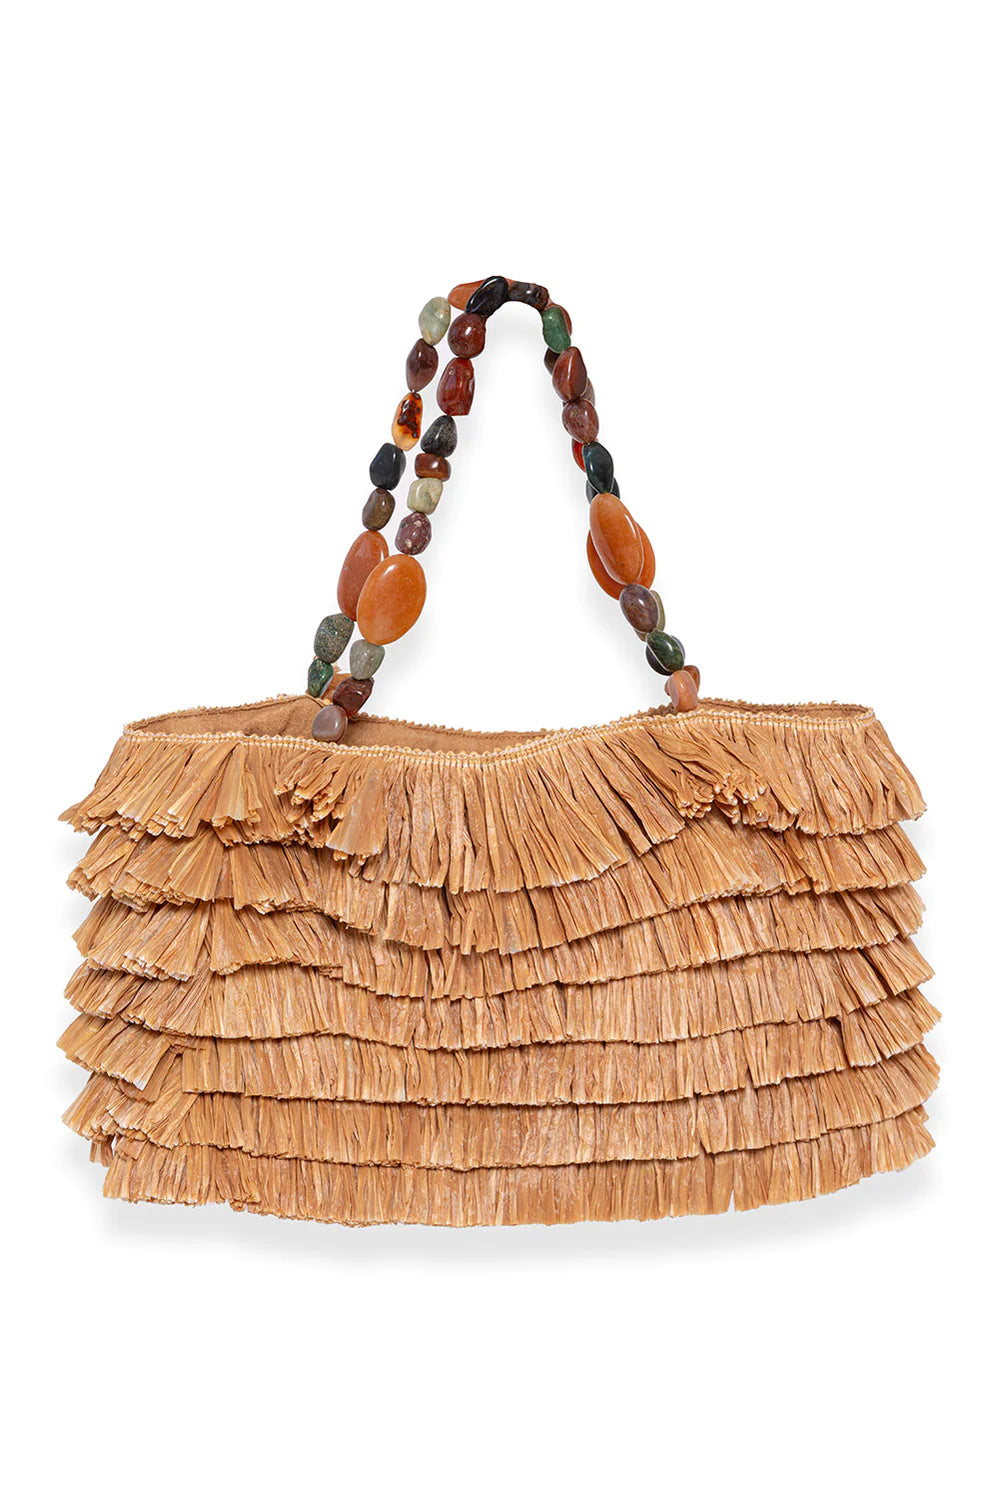 Layered raffia oblong bag with stone beaded handles and gold metallic zip fastening